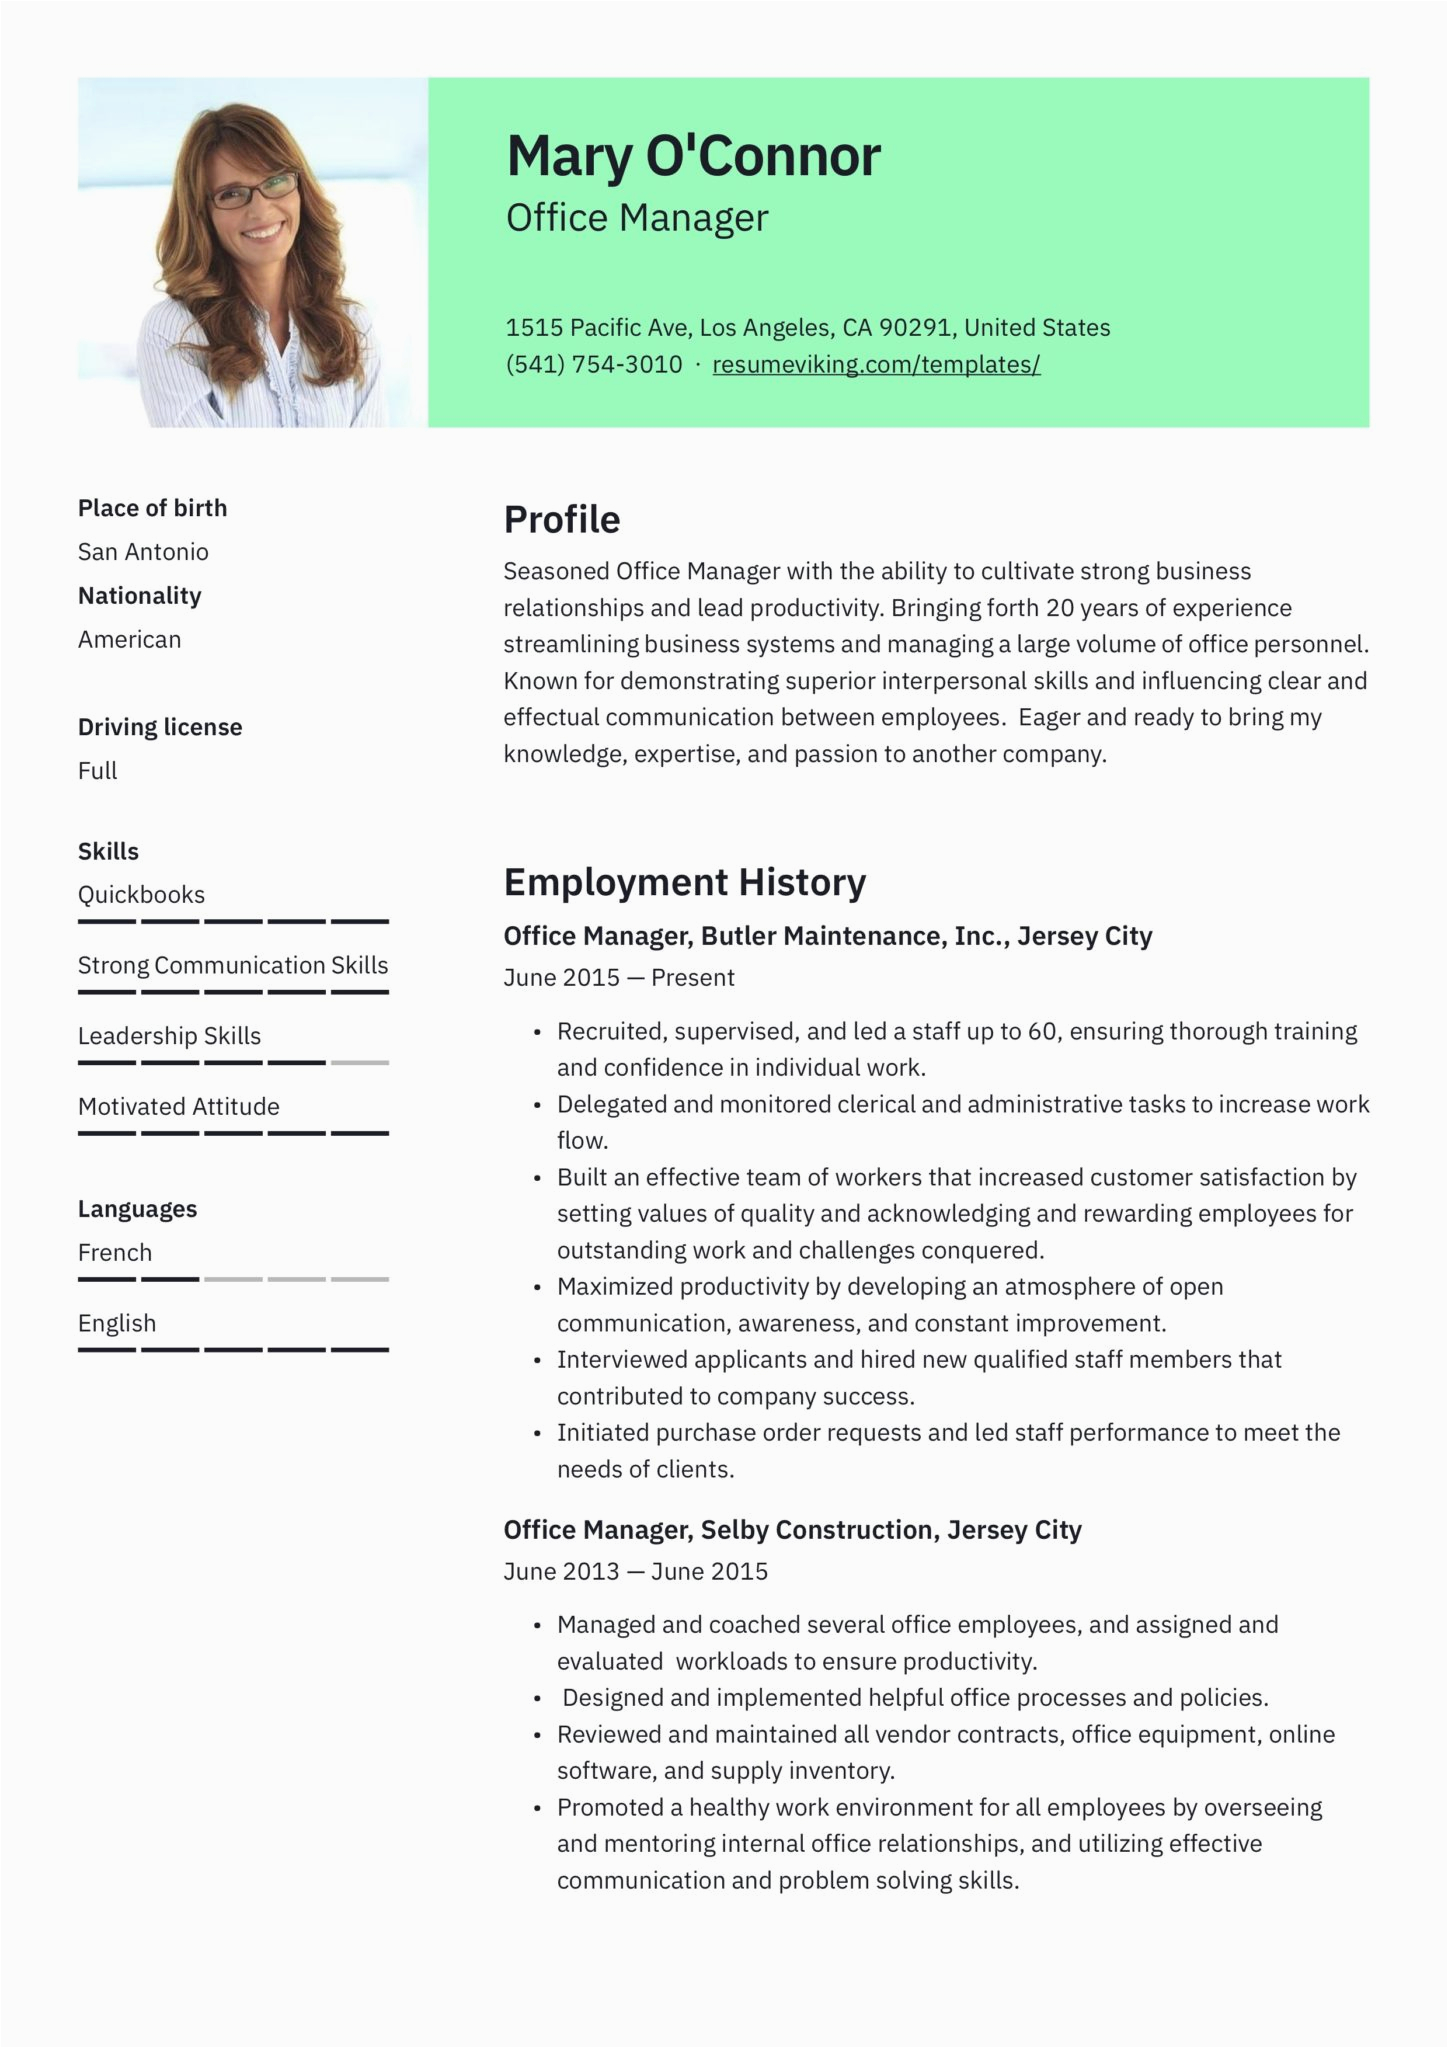 Sample Professional Resume It Manager Position Fice Manager Resume & Guide 12 Samples Pdf